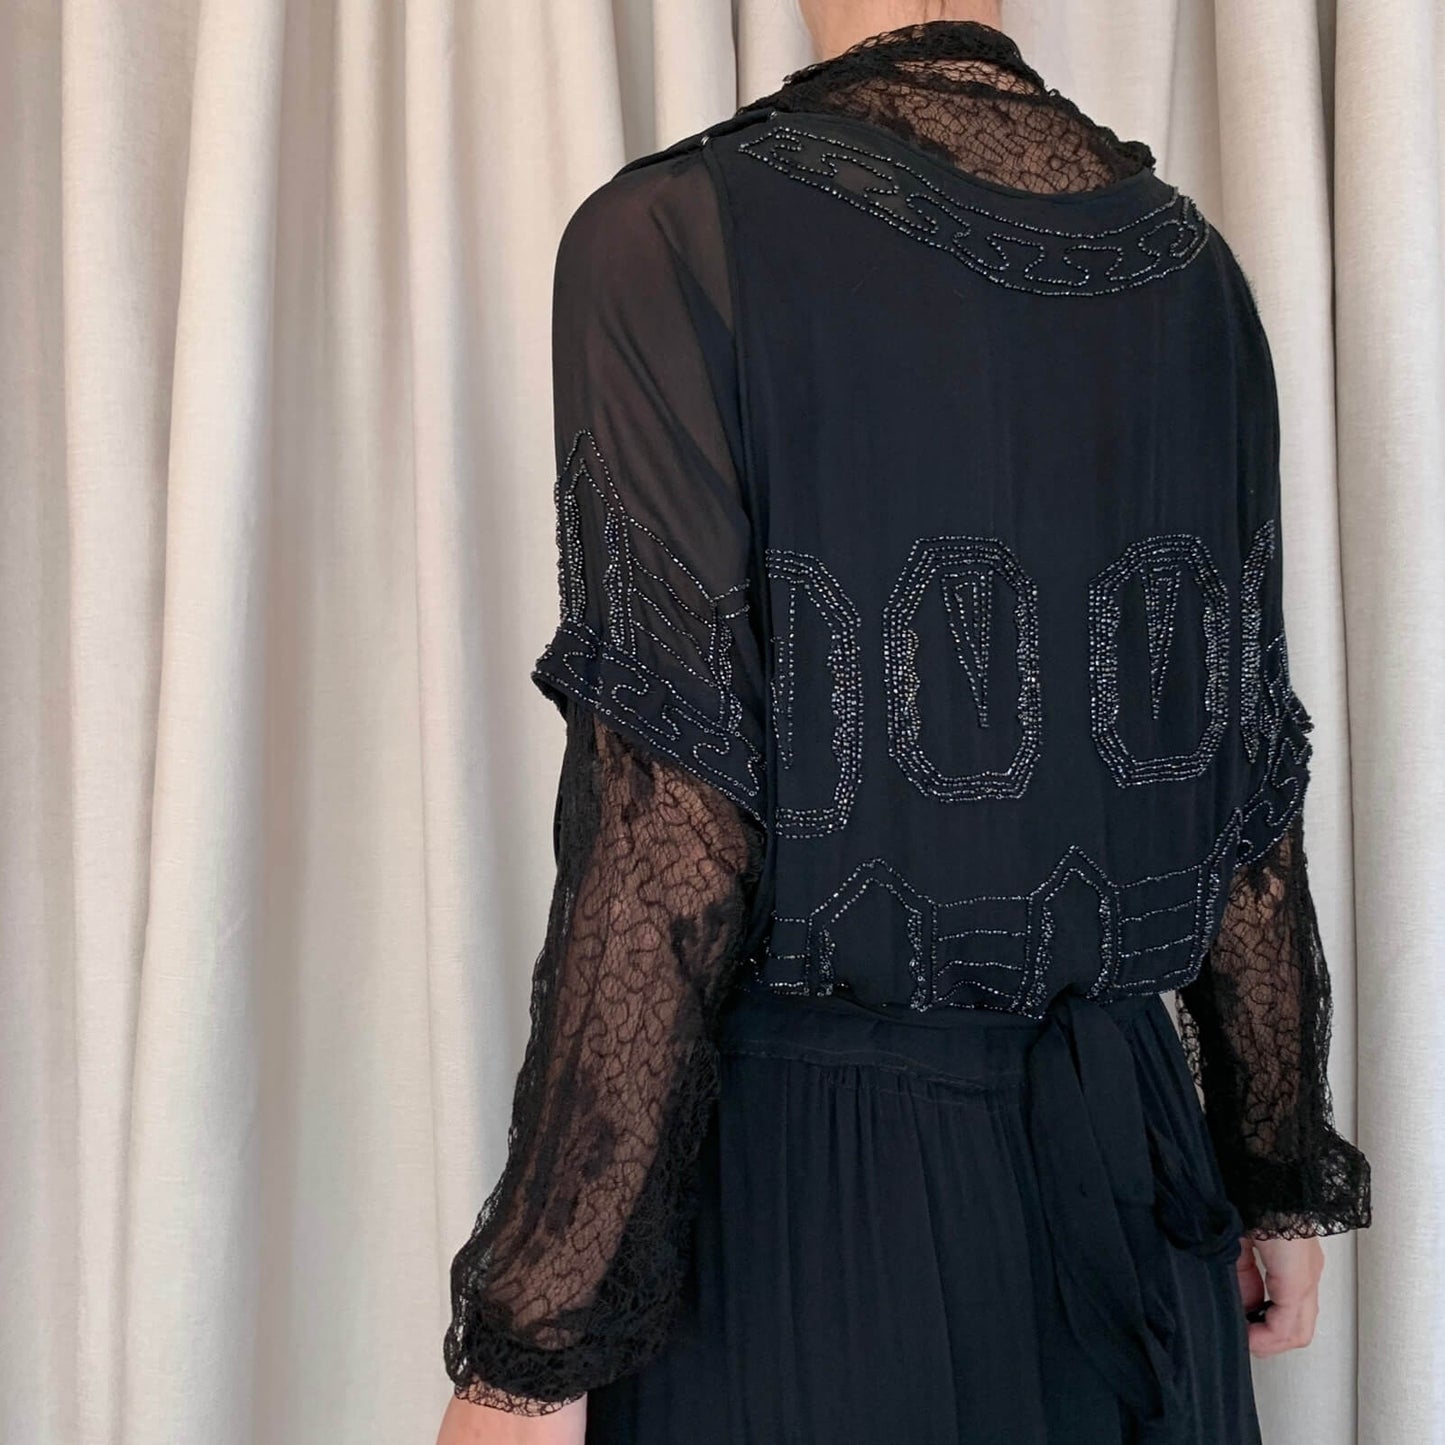 back view of a black vintage beaded dress with lace sleeves